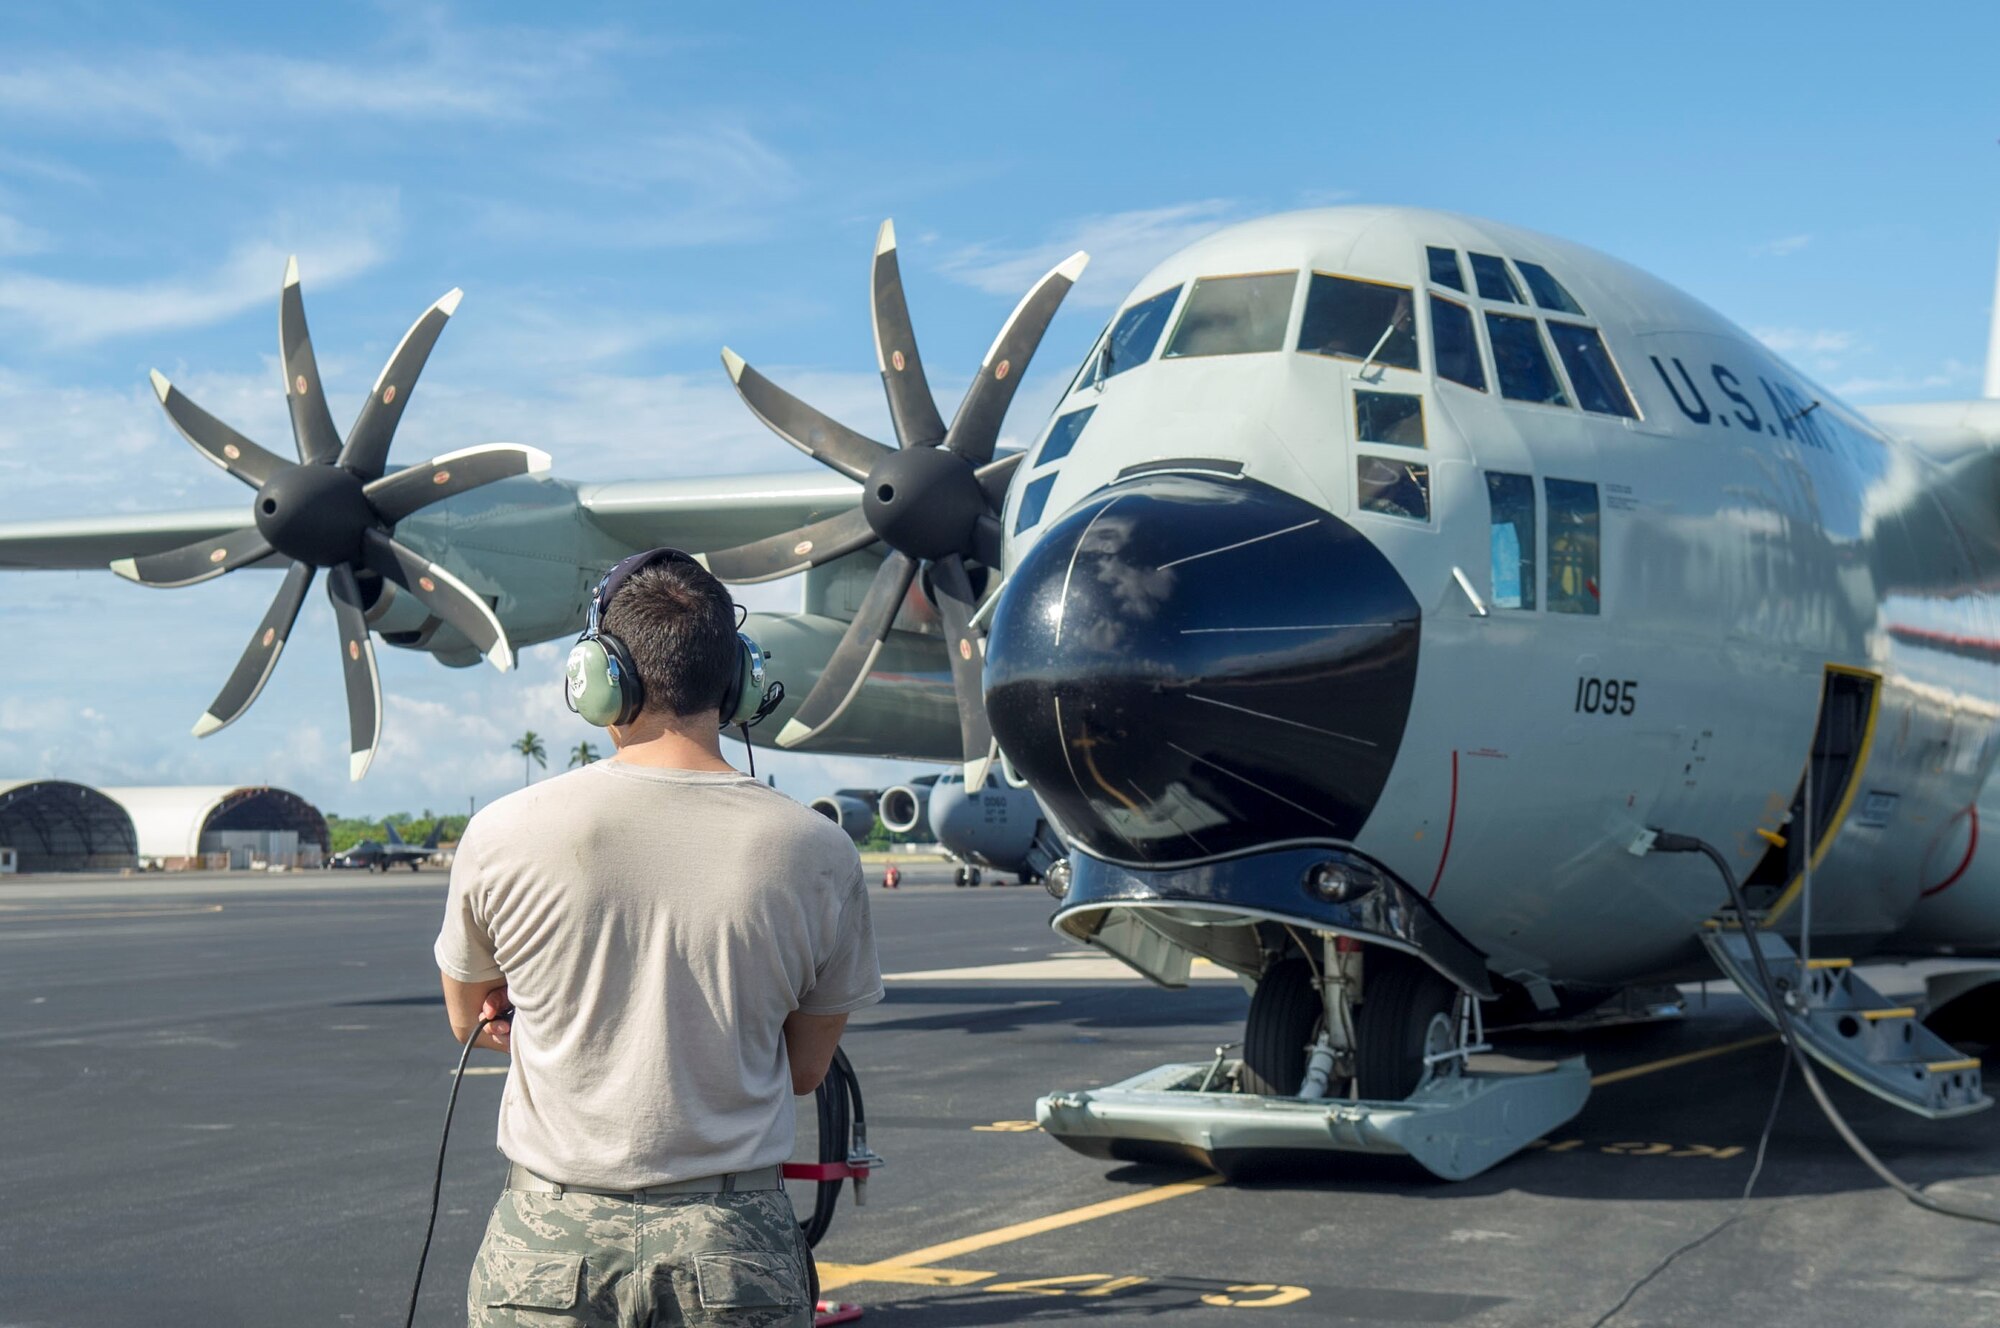 An Airman assigned to the 109th Airlift Wing, Stratton Air National Guard Base, New York, observes a LC-130 Hercules during pre-flight inspections on the flightline at Joint Base Pearl Harbor-Hickam, Hawaii, Oct. 31, 2019. The 2018-2019 Operation DEEP FREEZE season saw the first fully operational deployment of a U.S. Air Force LC-130H fleet modified with new propellers. The new propeller system has helped improve takeoff performance. Operation DEEP FREEZE is the U.S. military’s contribution to the National Science Foundation-managed U.S. Antarctic Program.  (U.S. Air Force photo by Staff Sgt. Mikaley Kline)